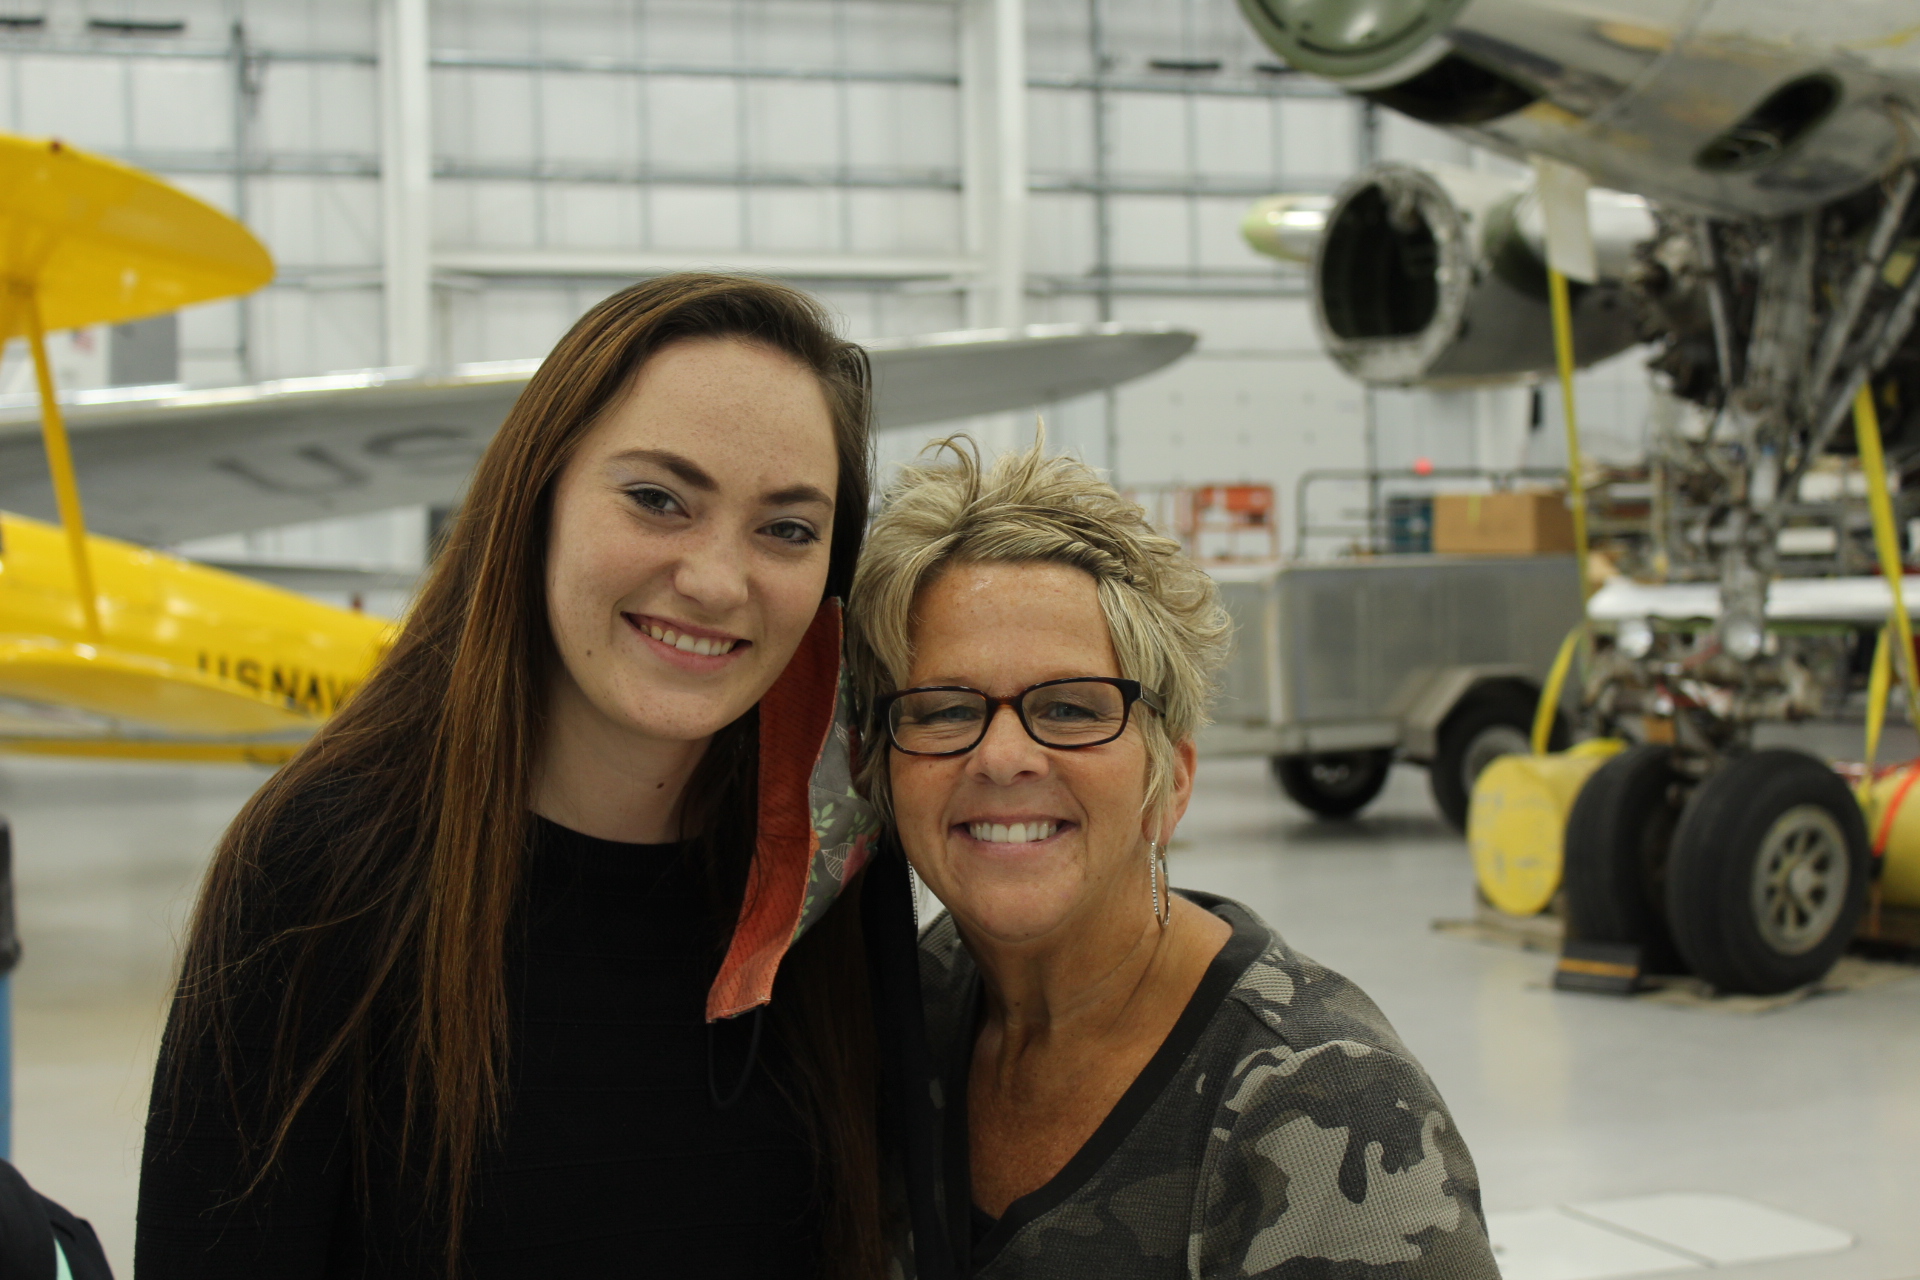 A mother and daughter smile for the camera in a hangar.